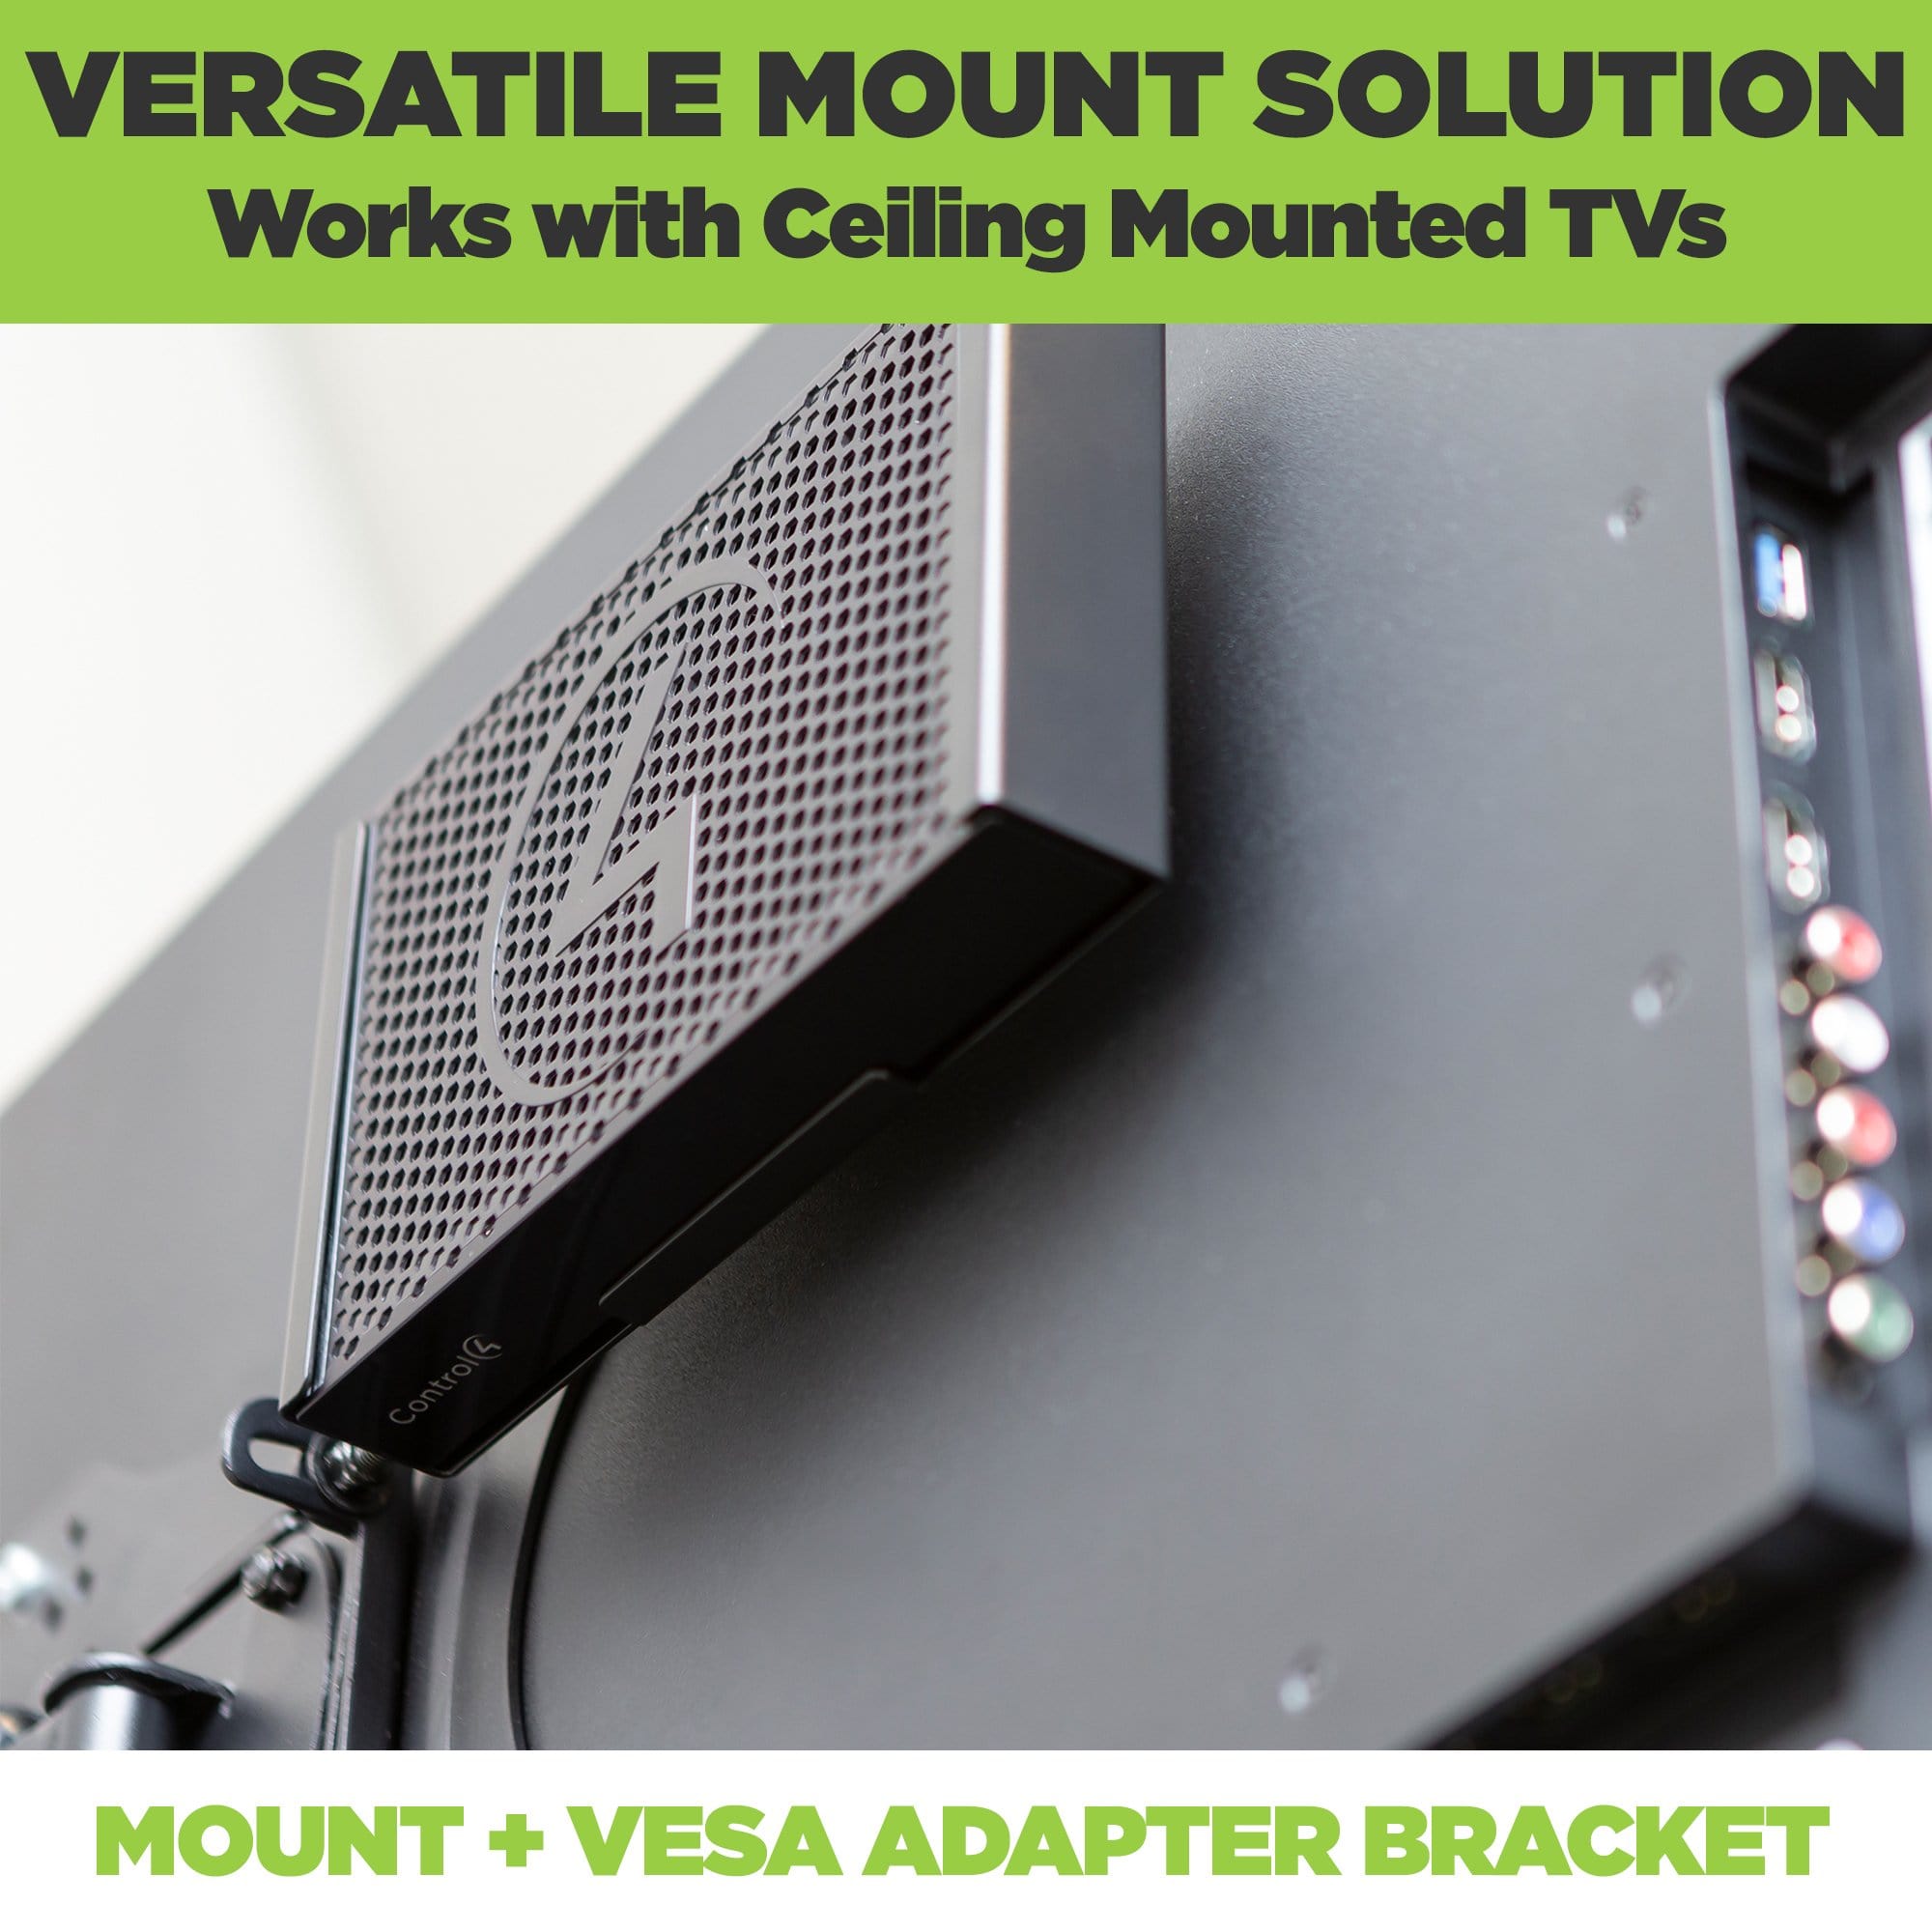 VESA mount the Control4 controller to the back of ceiling mounted TVs with the HIDEit EA-1 Mount and VESA Adapter bracket